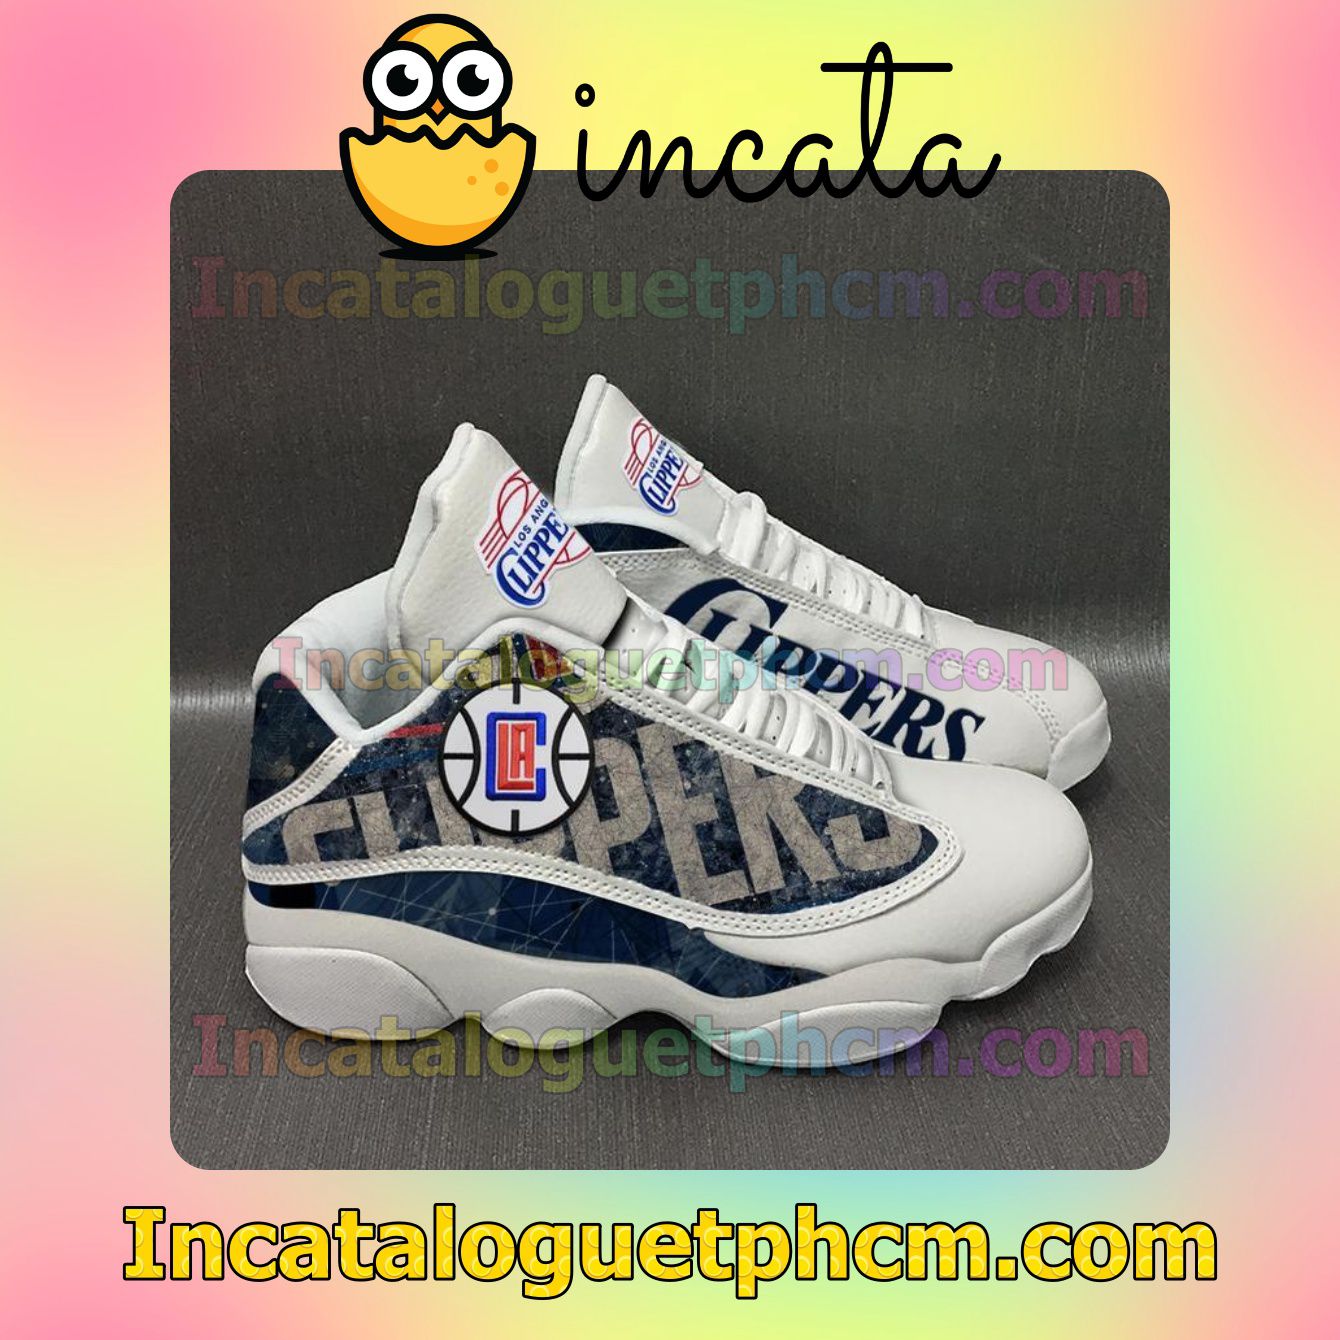 The Los Angeles Clippers Jordans